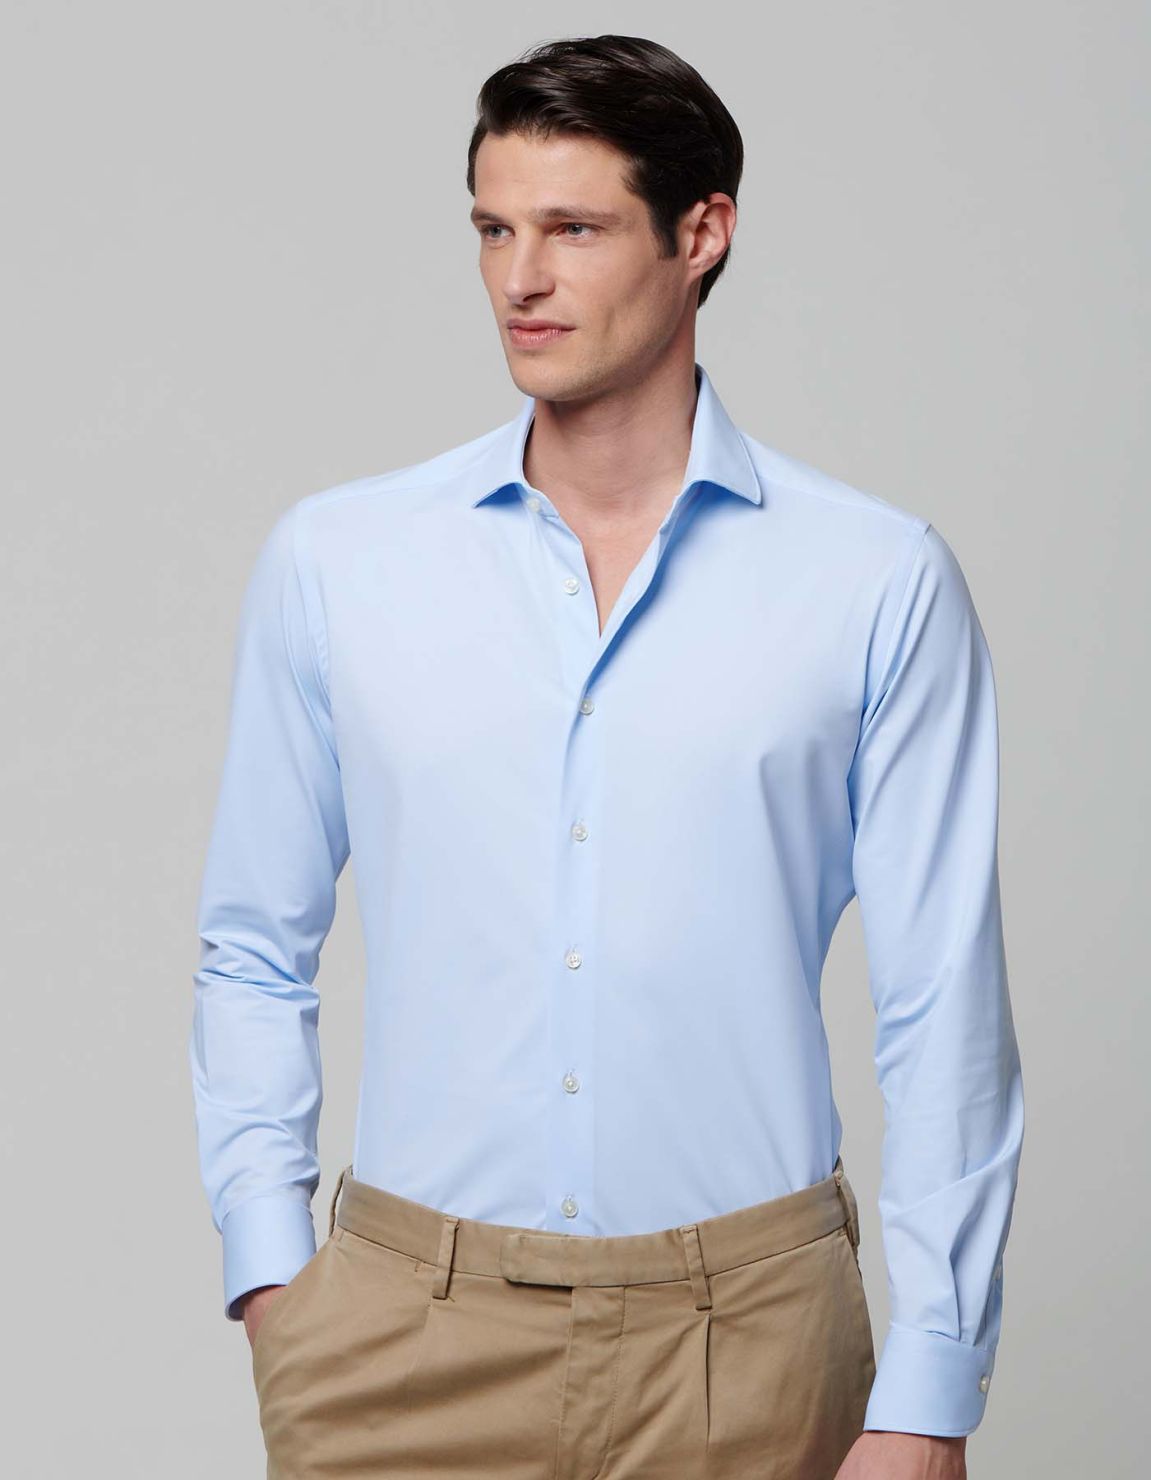 Sky Blue Oxford Solid colour Shirt Collar small cutaway Evolution Classic Fit 1